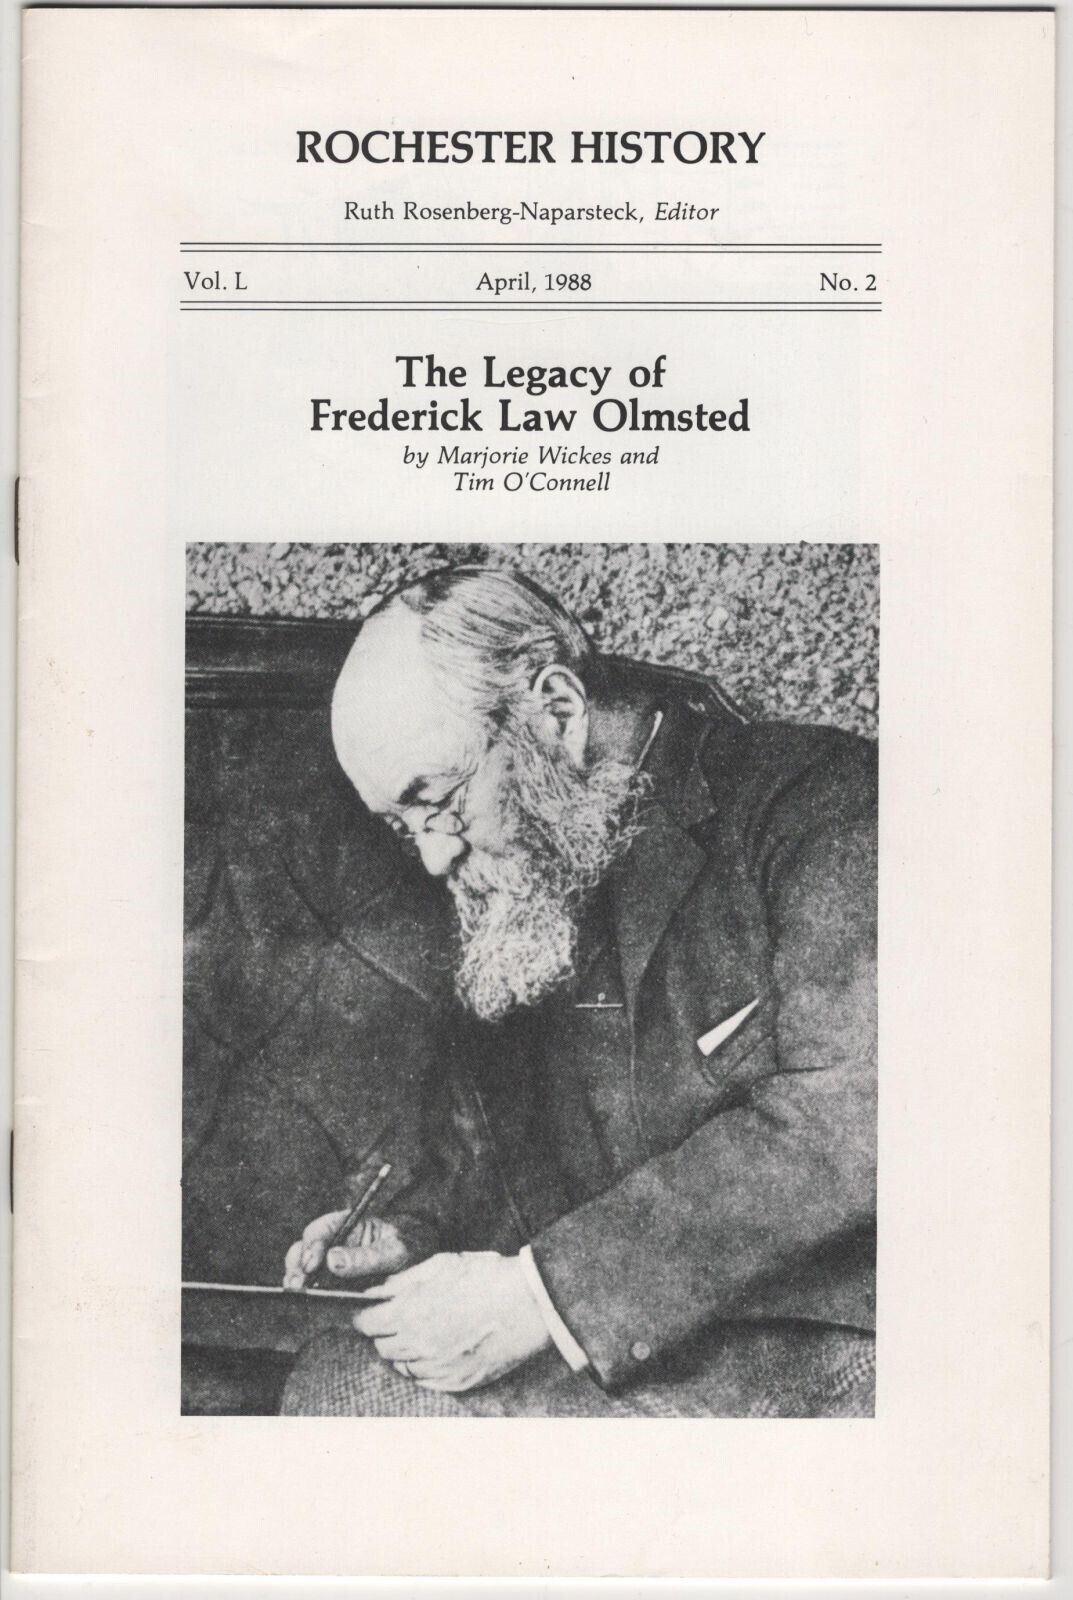 The Legacy of Frederick Law Olmsted Rochester NY History Landscape Architect